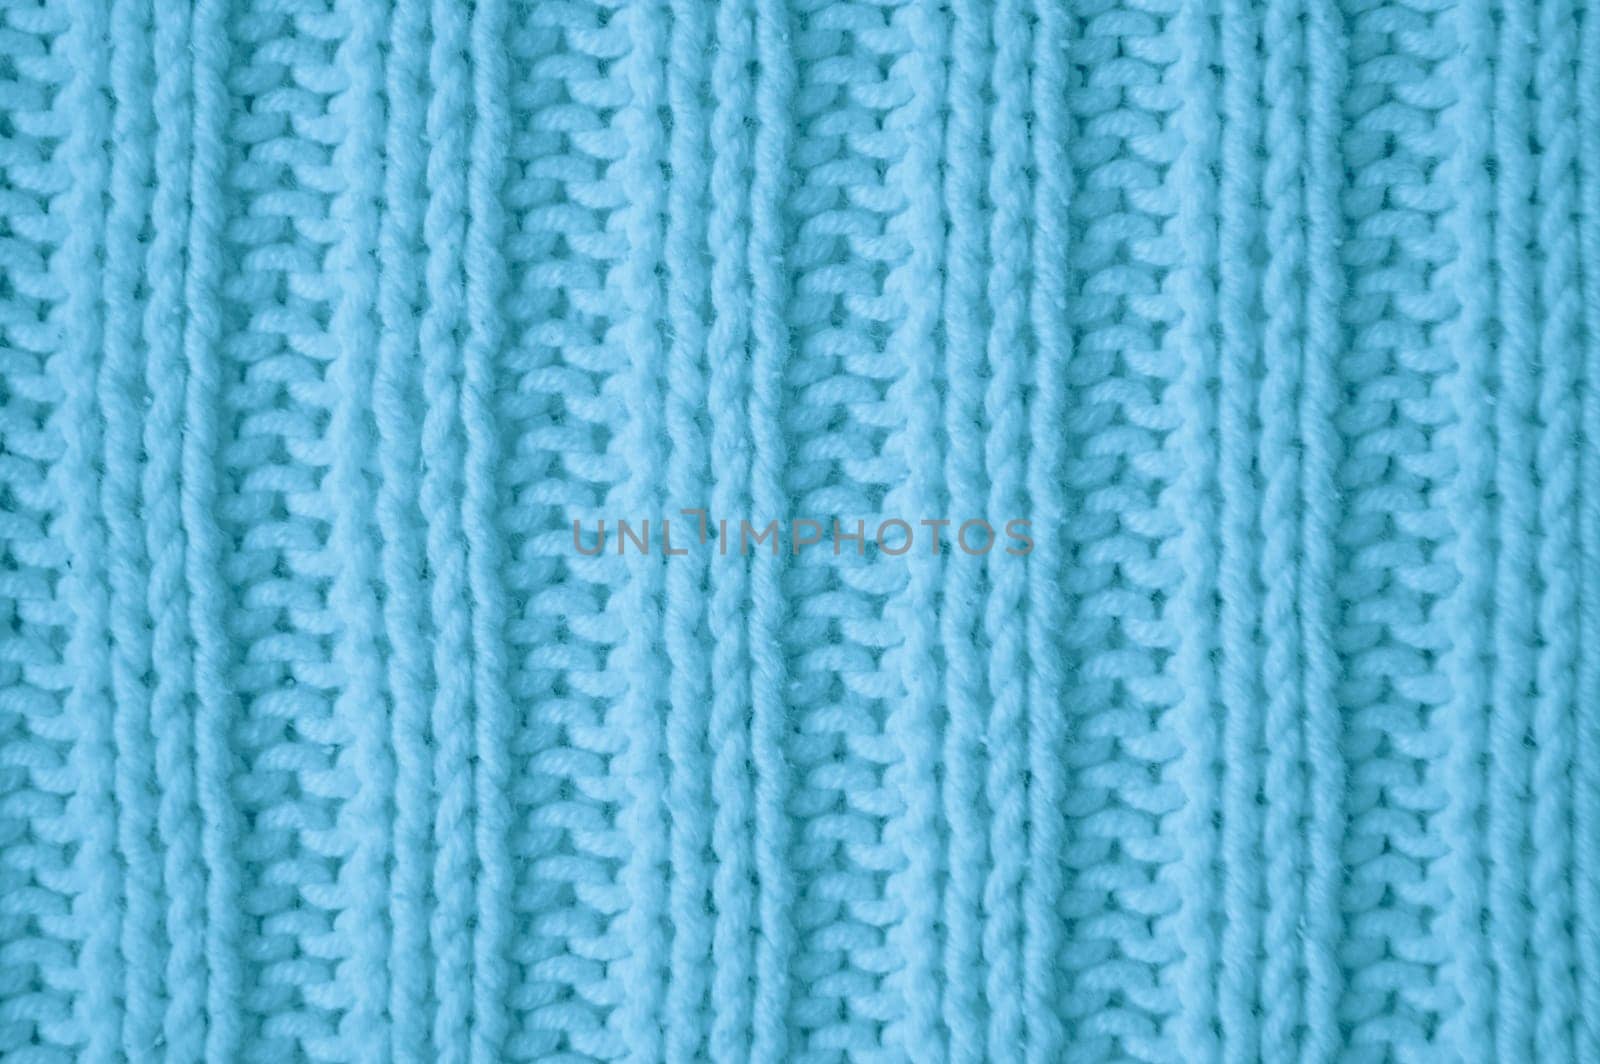 Soft Knitted Blanket. Abstract Woolen Pullover. Jacquard Warm Background. Knitted Sweater. Blue Fiber Thread. Scandinavian Xmas Yarn. Closeup Print Material. Structure Knitted Blanket.